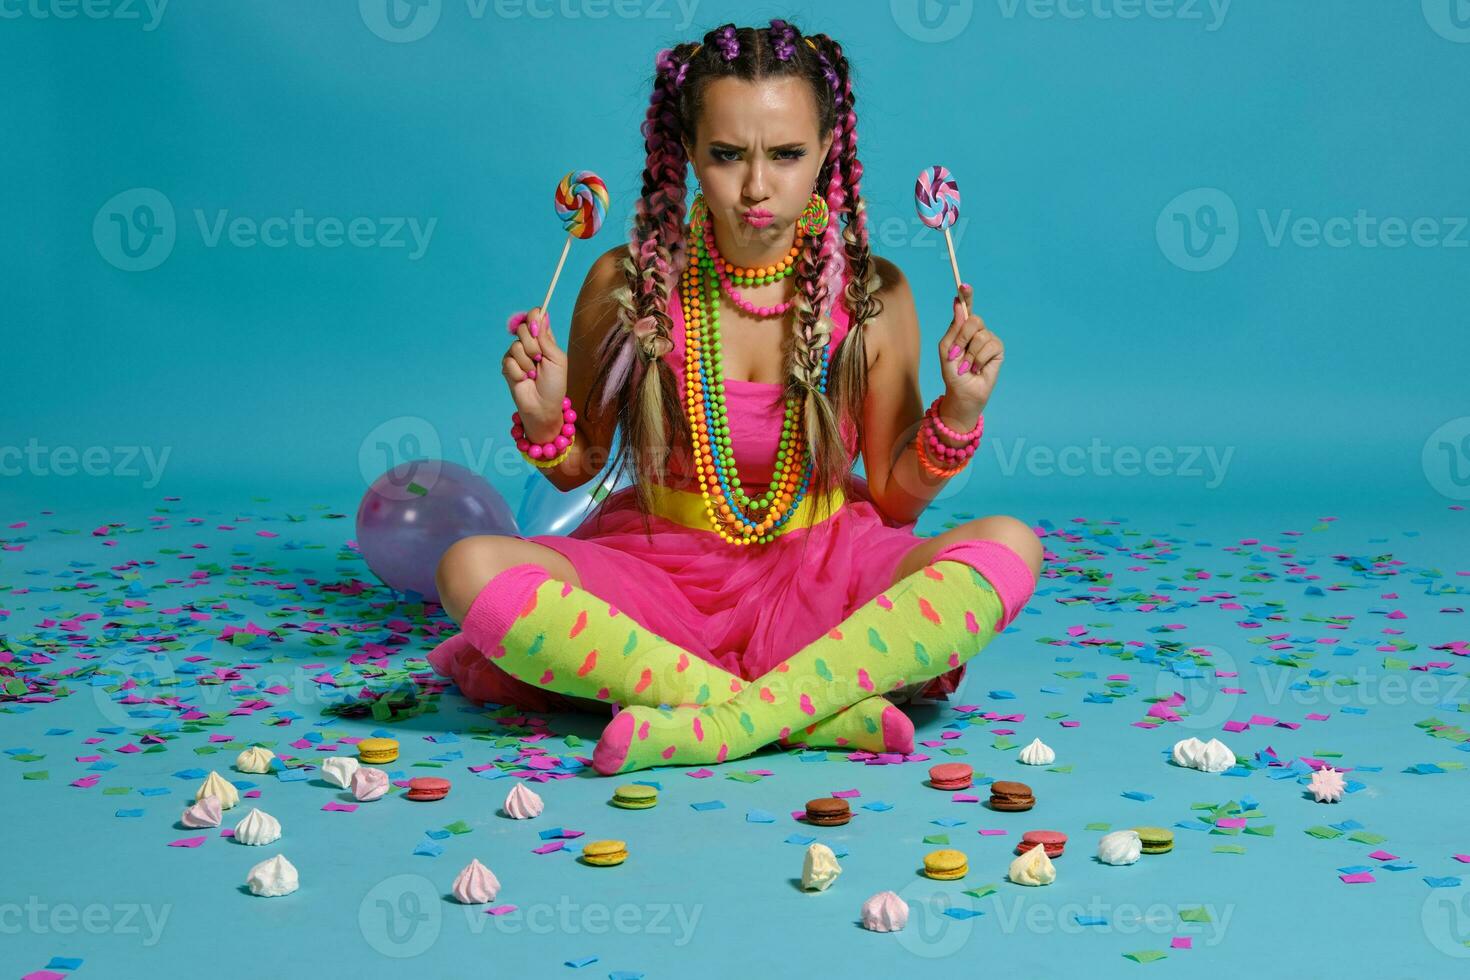 Lovely girl with a multi-colored braids hairstyle and bright make-up, posing in studio with lollipop, air balloons and confetti against a blue background. photo